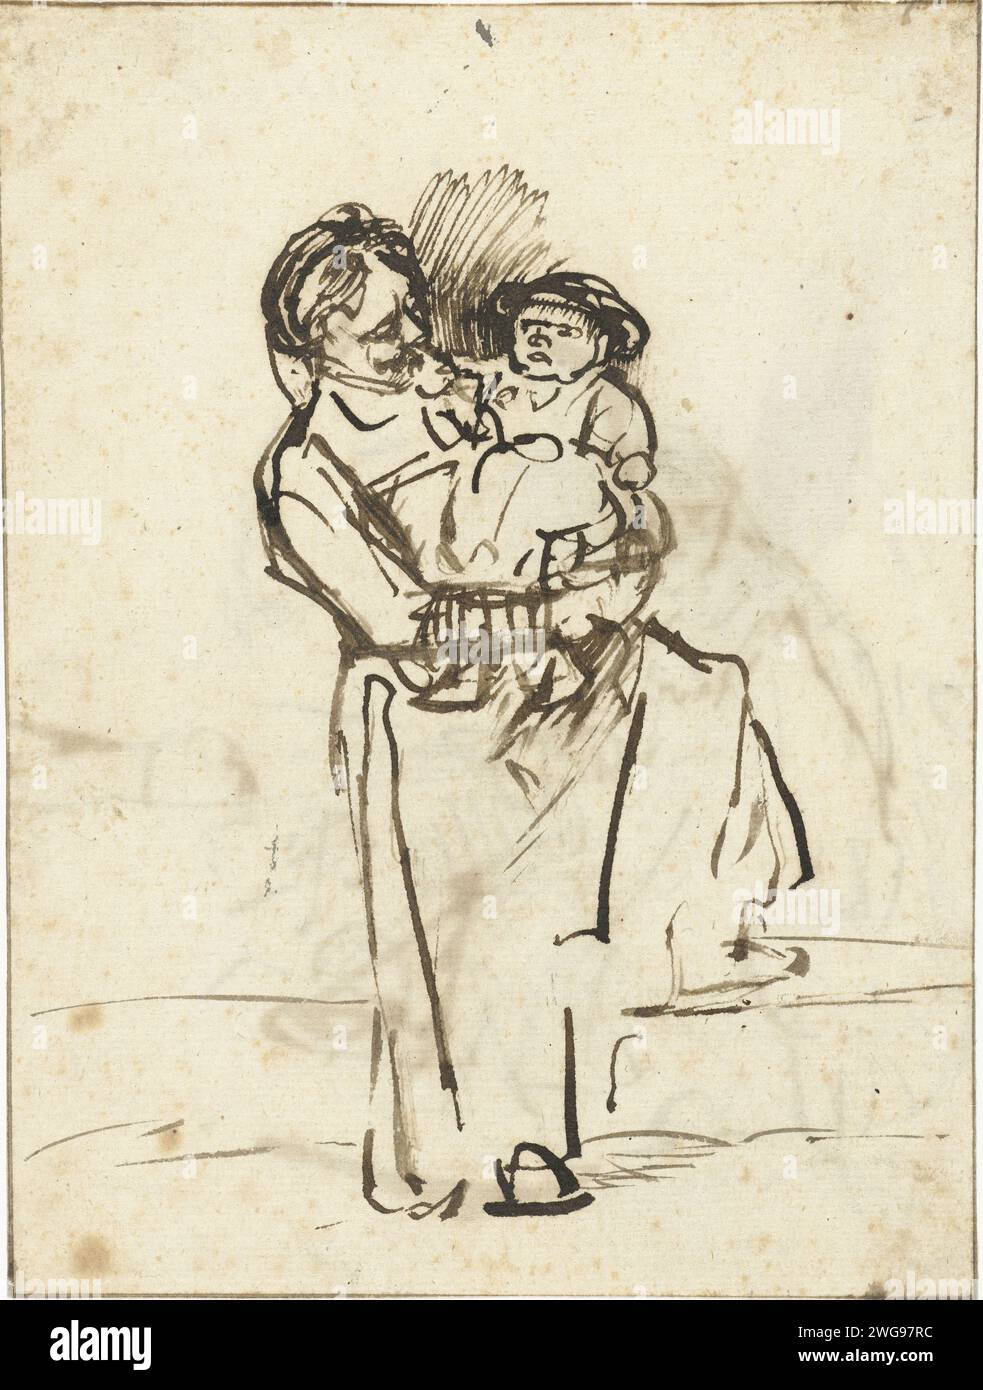 Standing Woman Holding a Child, Jan Victors (attributed to), c. 1635 - c. 1638 drawing  Amsterdam paper. ink pen mother and baby or young child Stock Photo